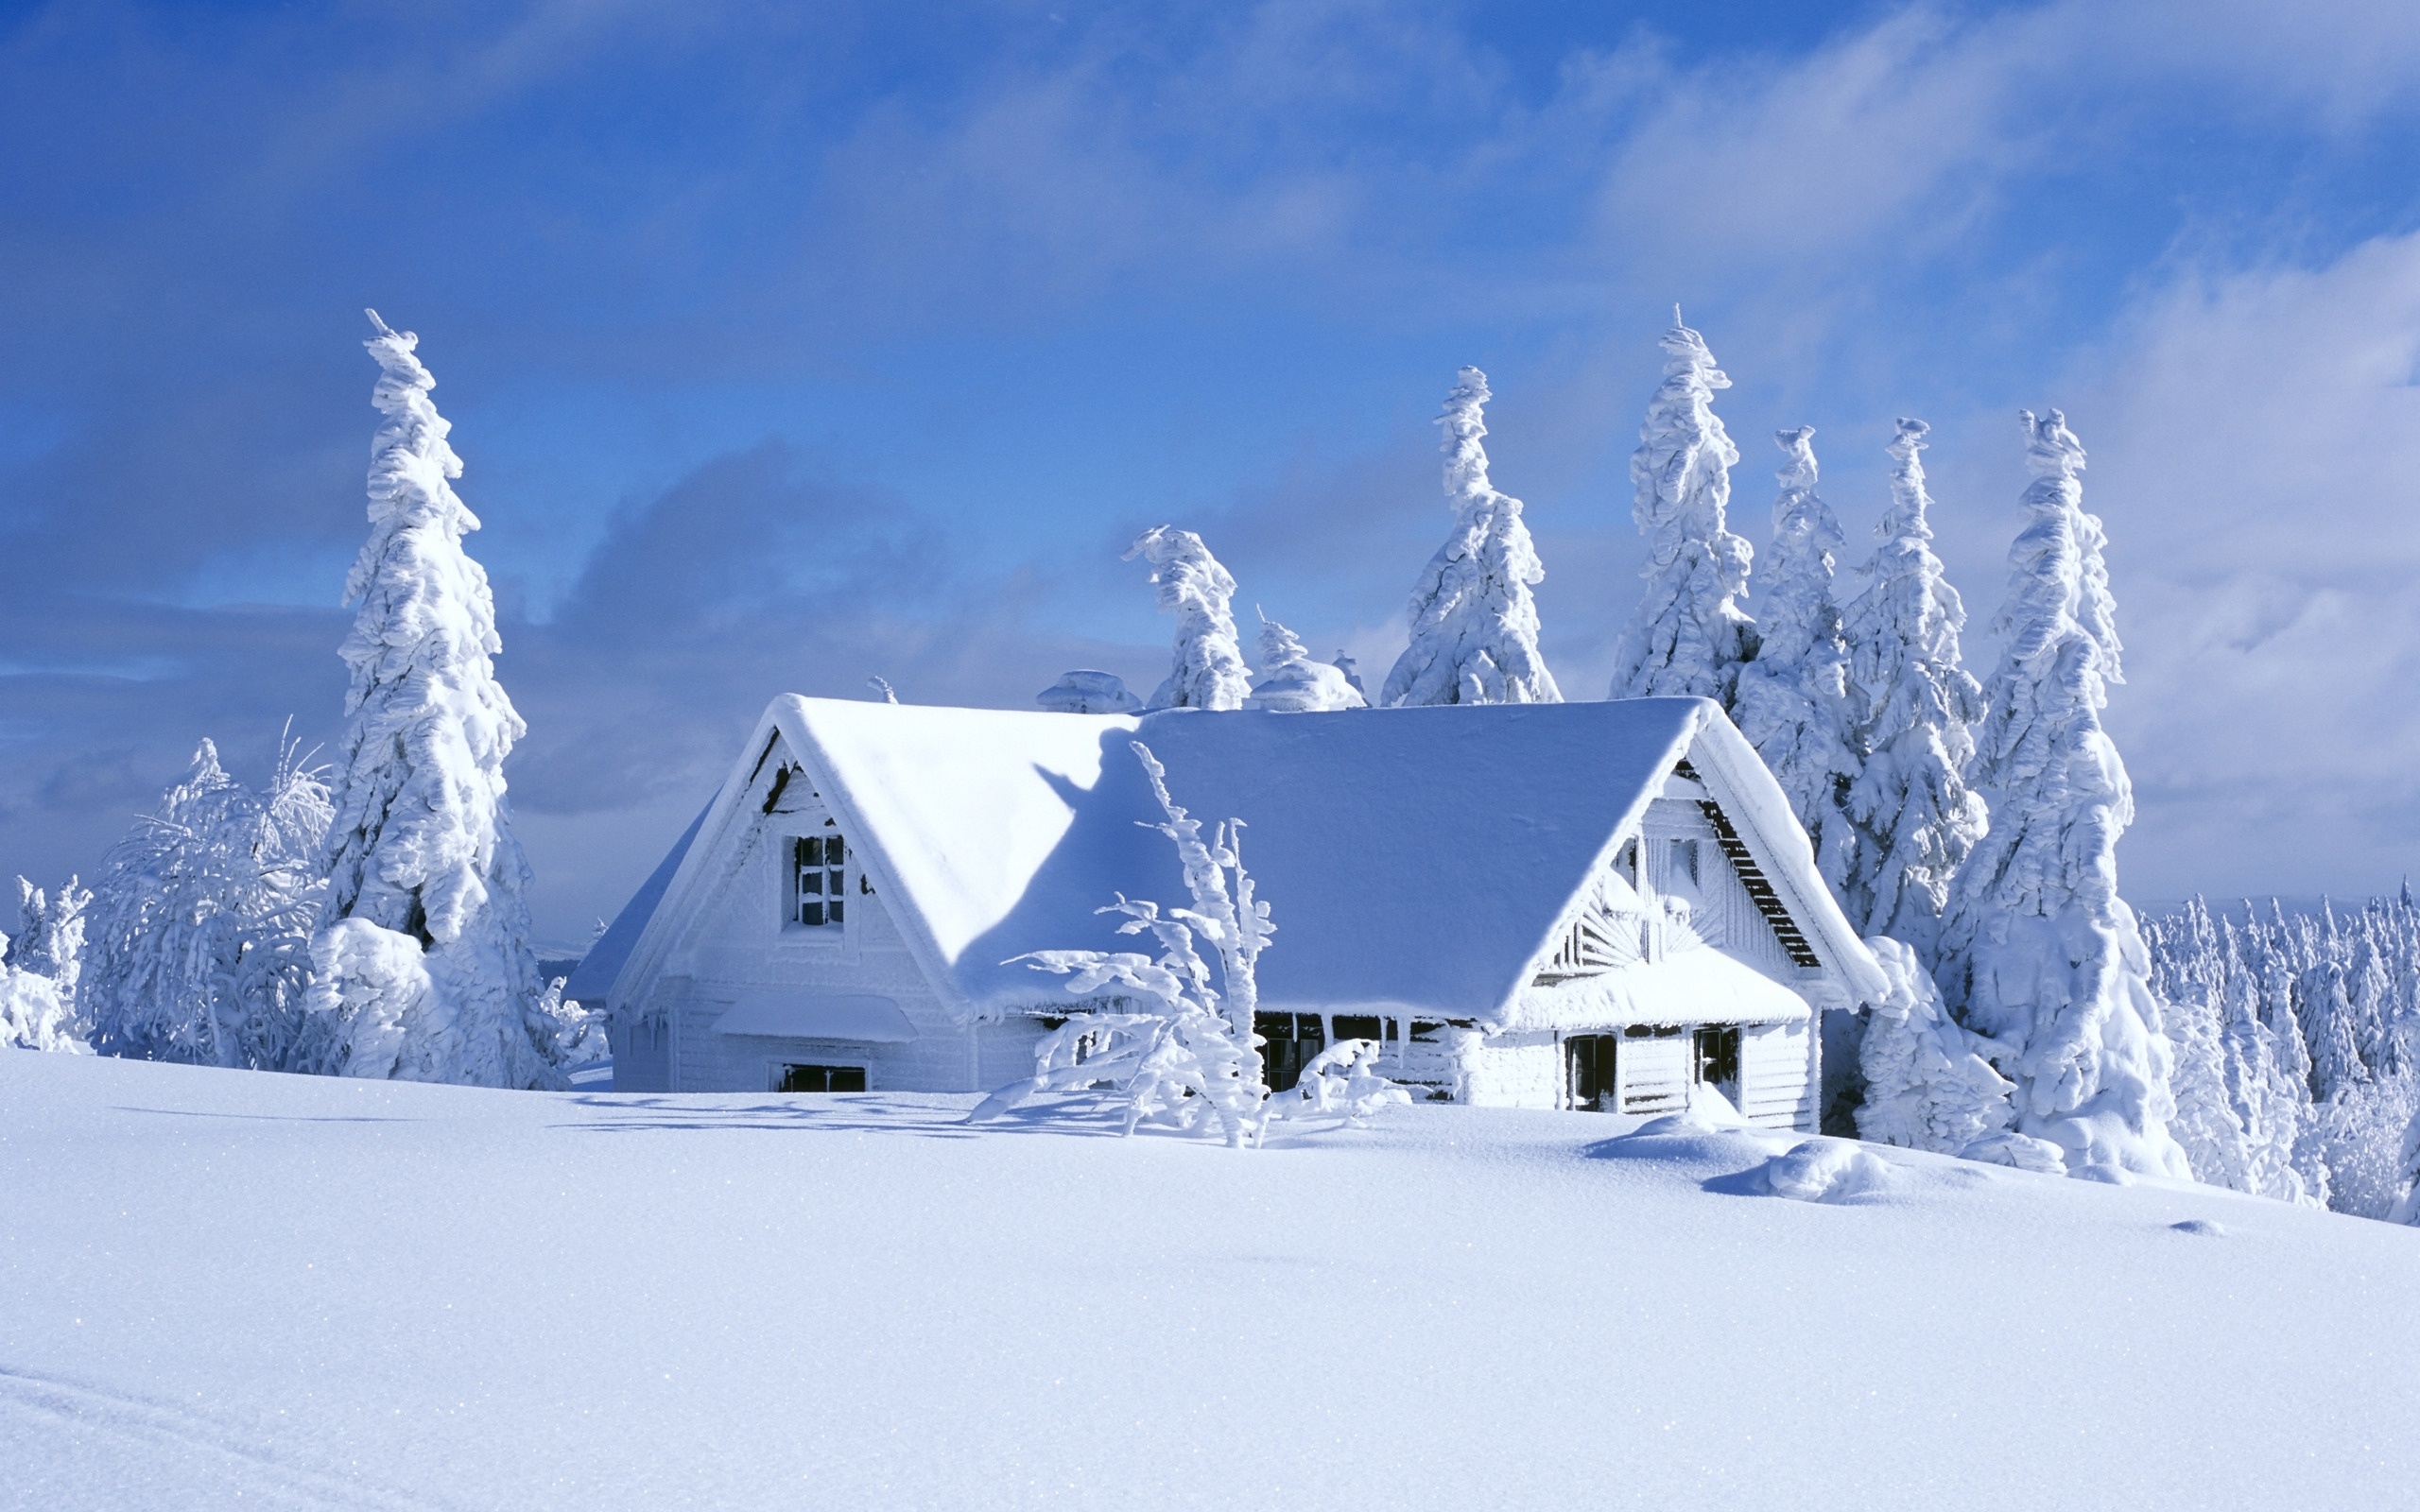 House Covered In Snow Wallpaper High Quality